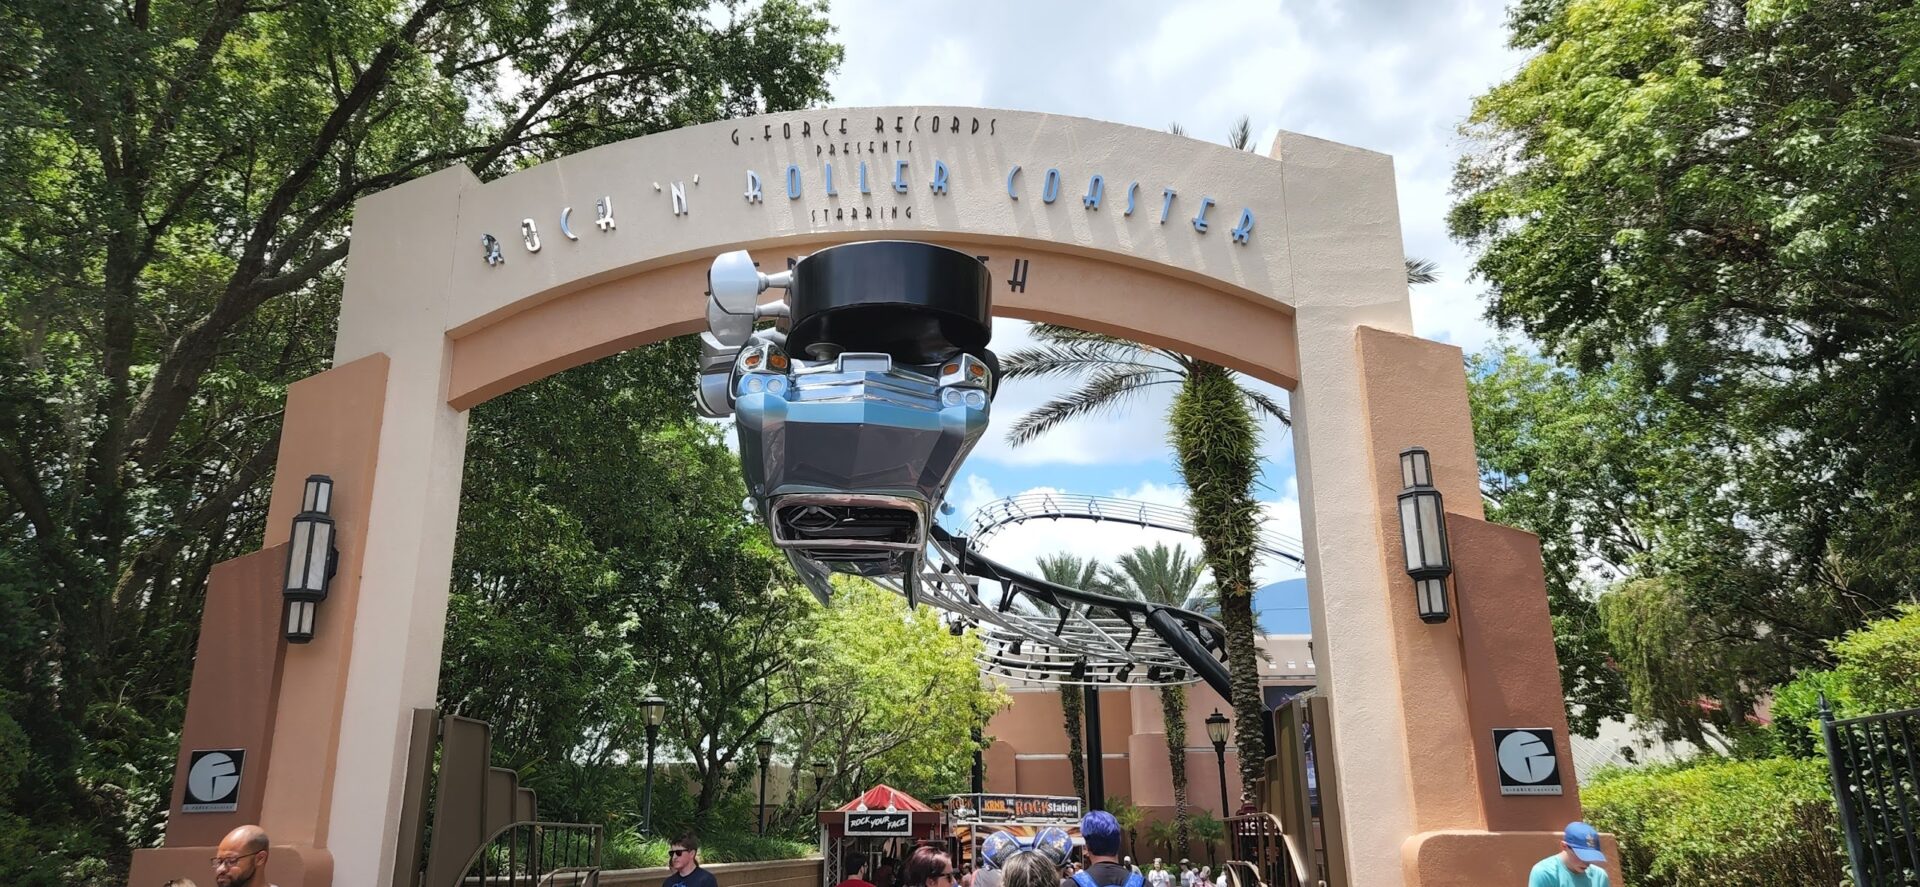 Rock ‘n’ Roller Coaster Reopens Unchanged at Disney’s Hollywood Studios After Extended Refurbishment